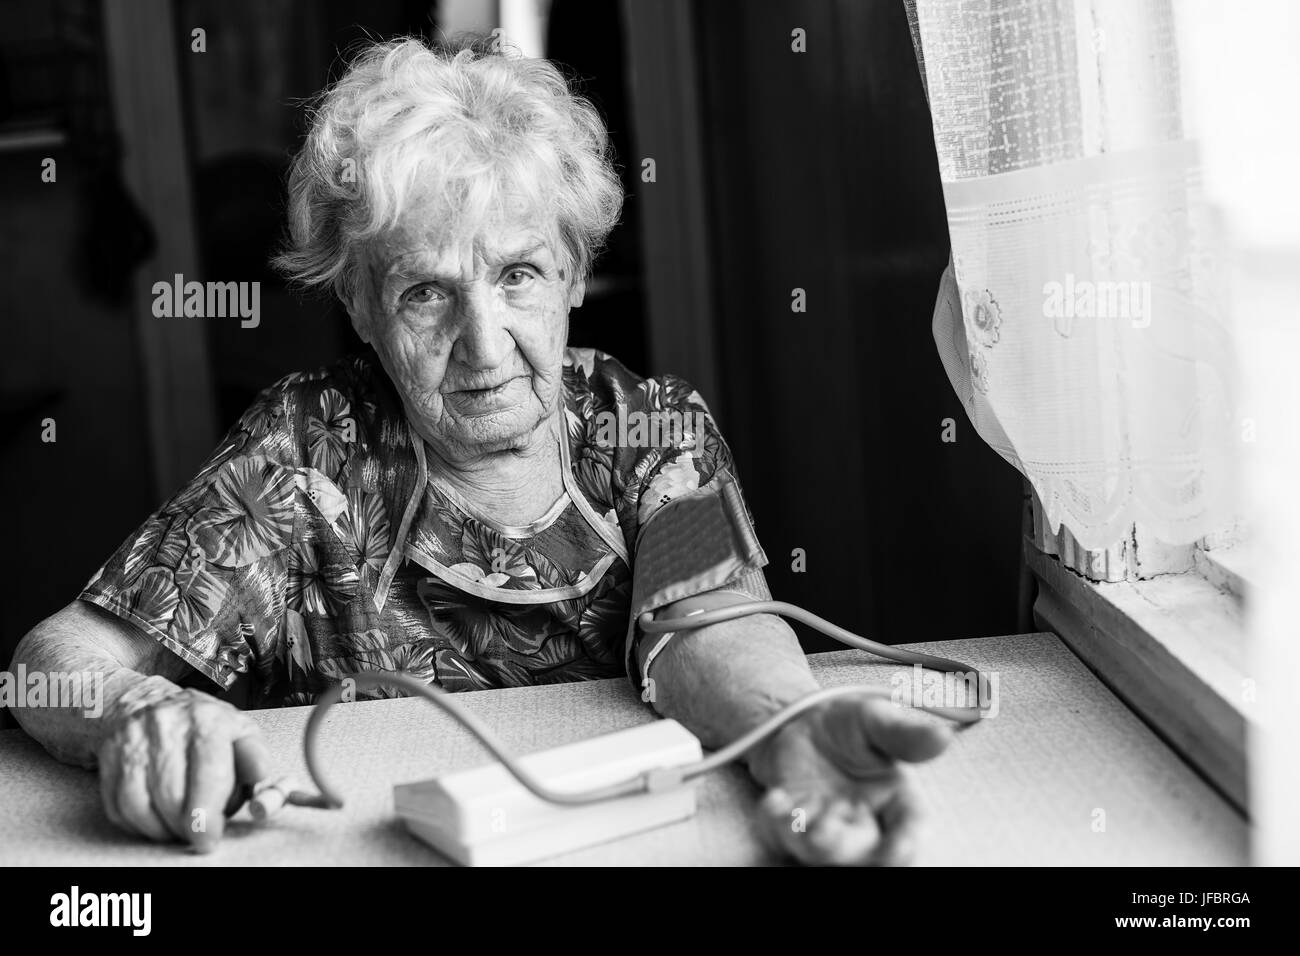 Old woman measures arterial pressure. Black-and-white photo. Stock Photo